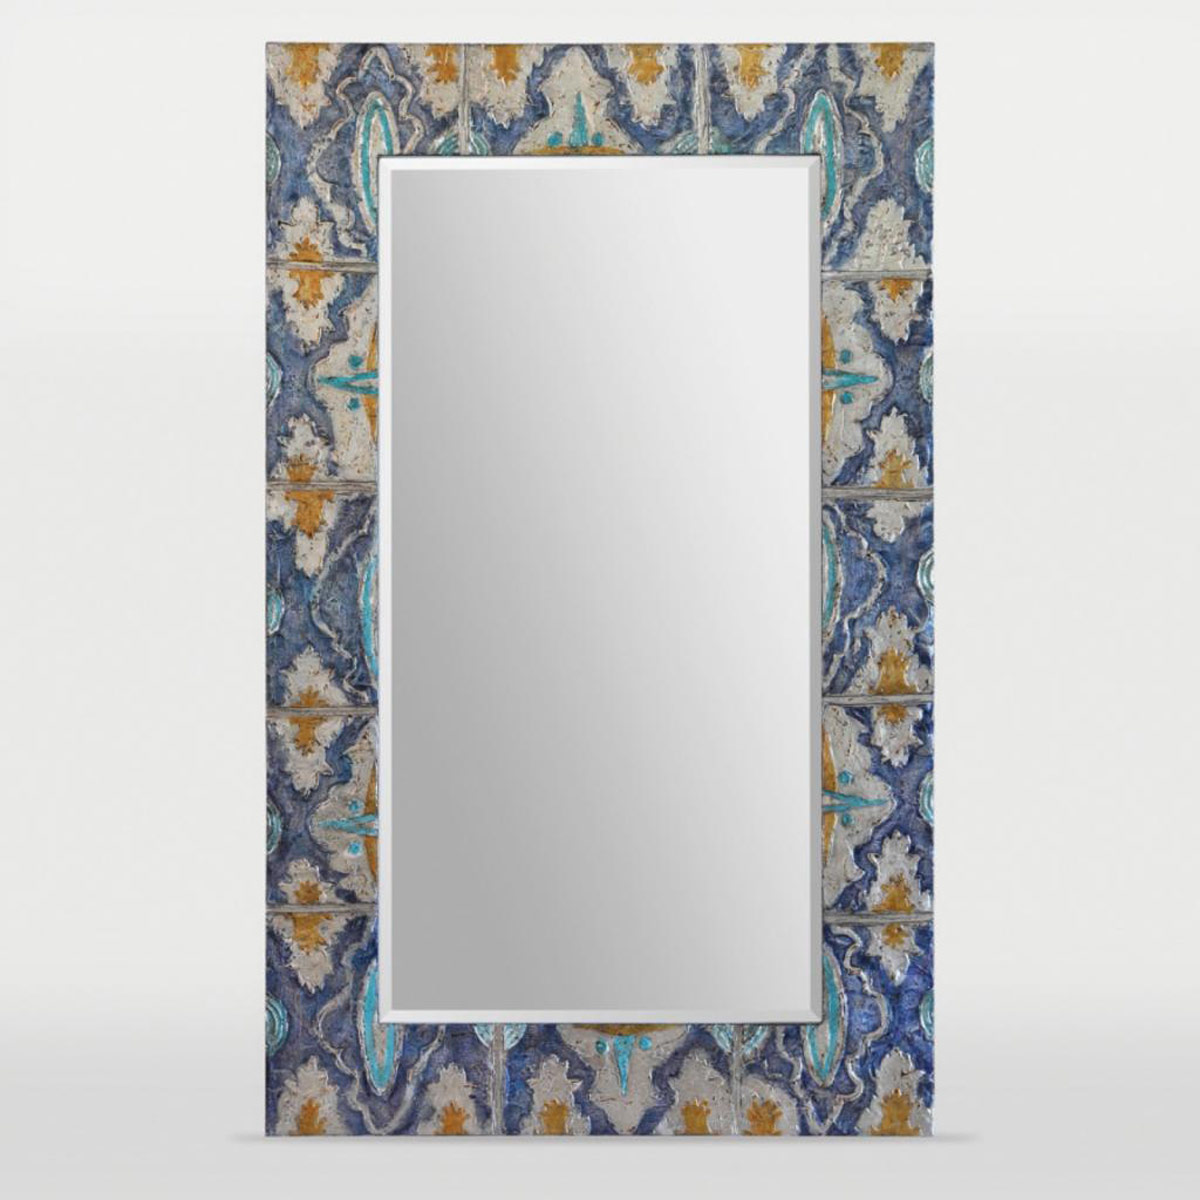 Ren-Wil Camellia Mirror - Hand Painted Multi Color With Heavy Texture